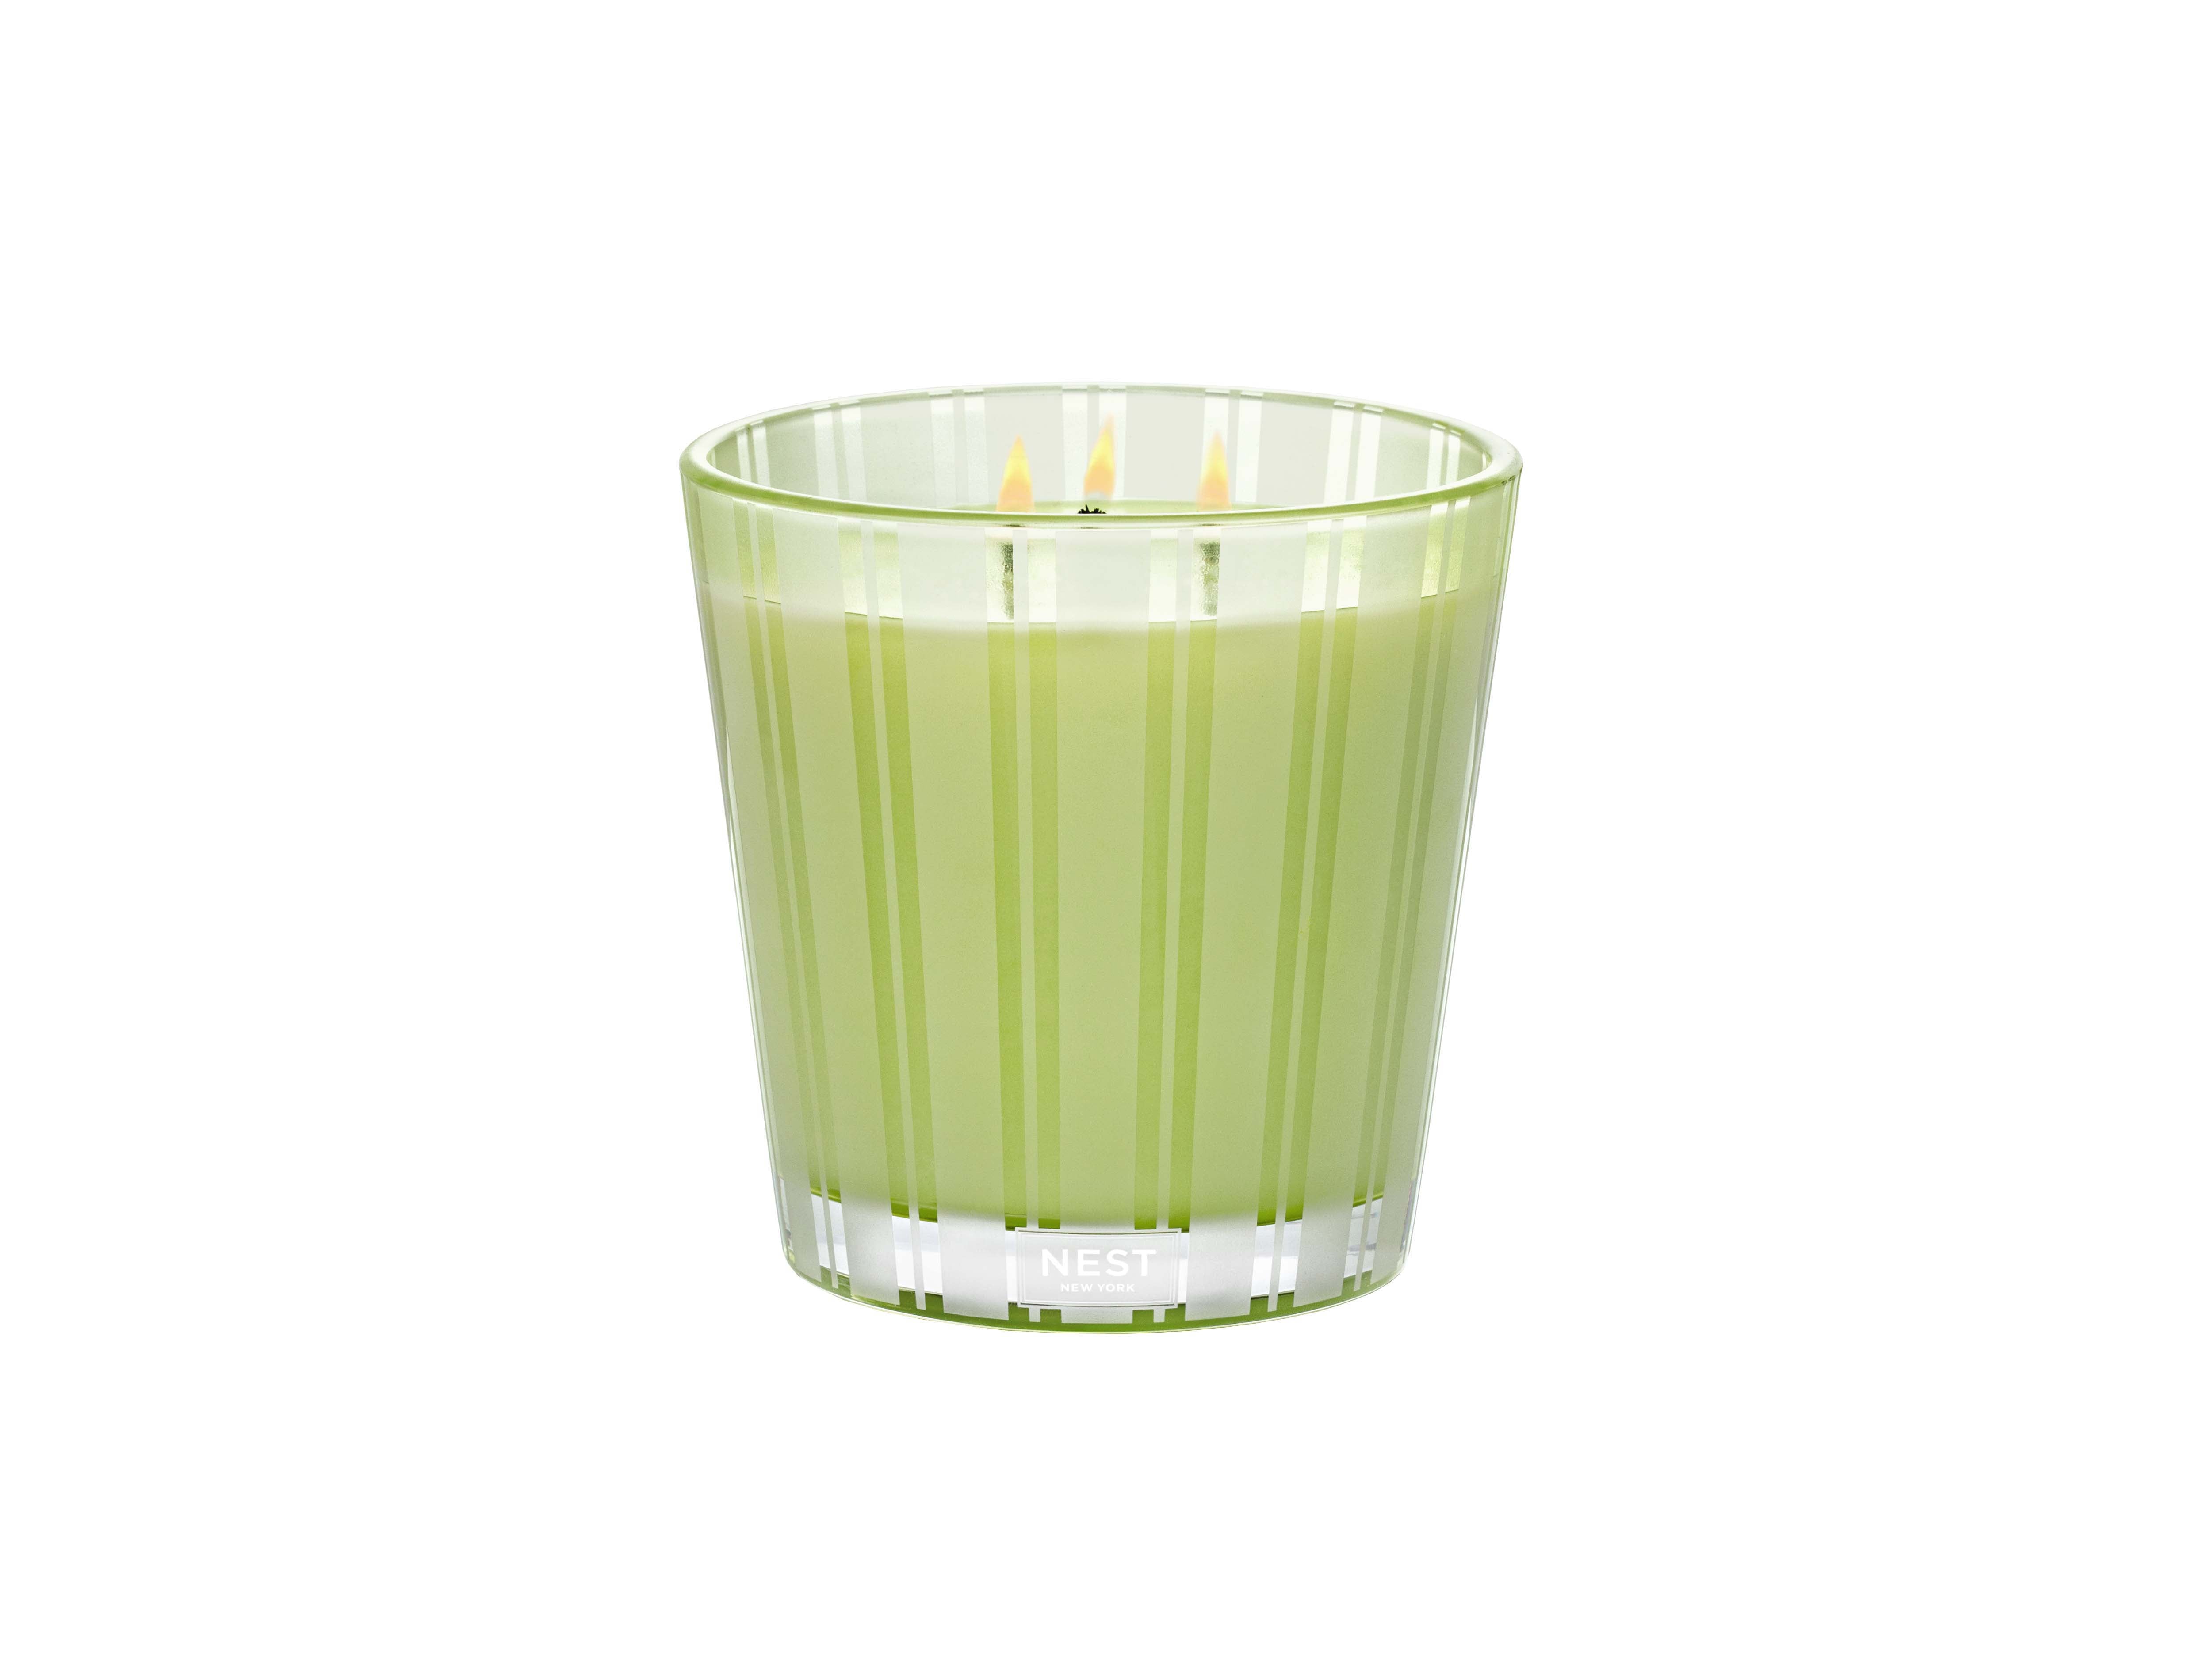 Lime Zest & Matcha 3-Wick Candle 21.2 oz by Nest New York







